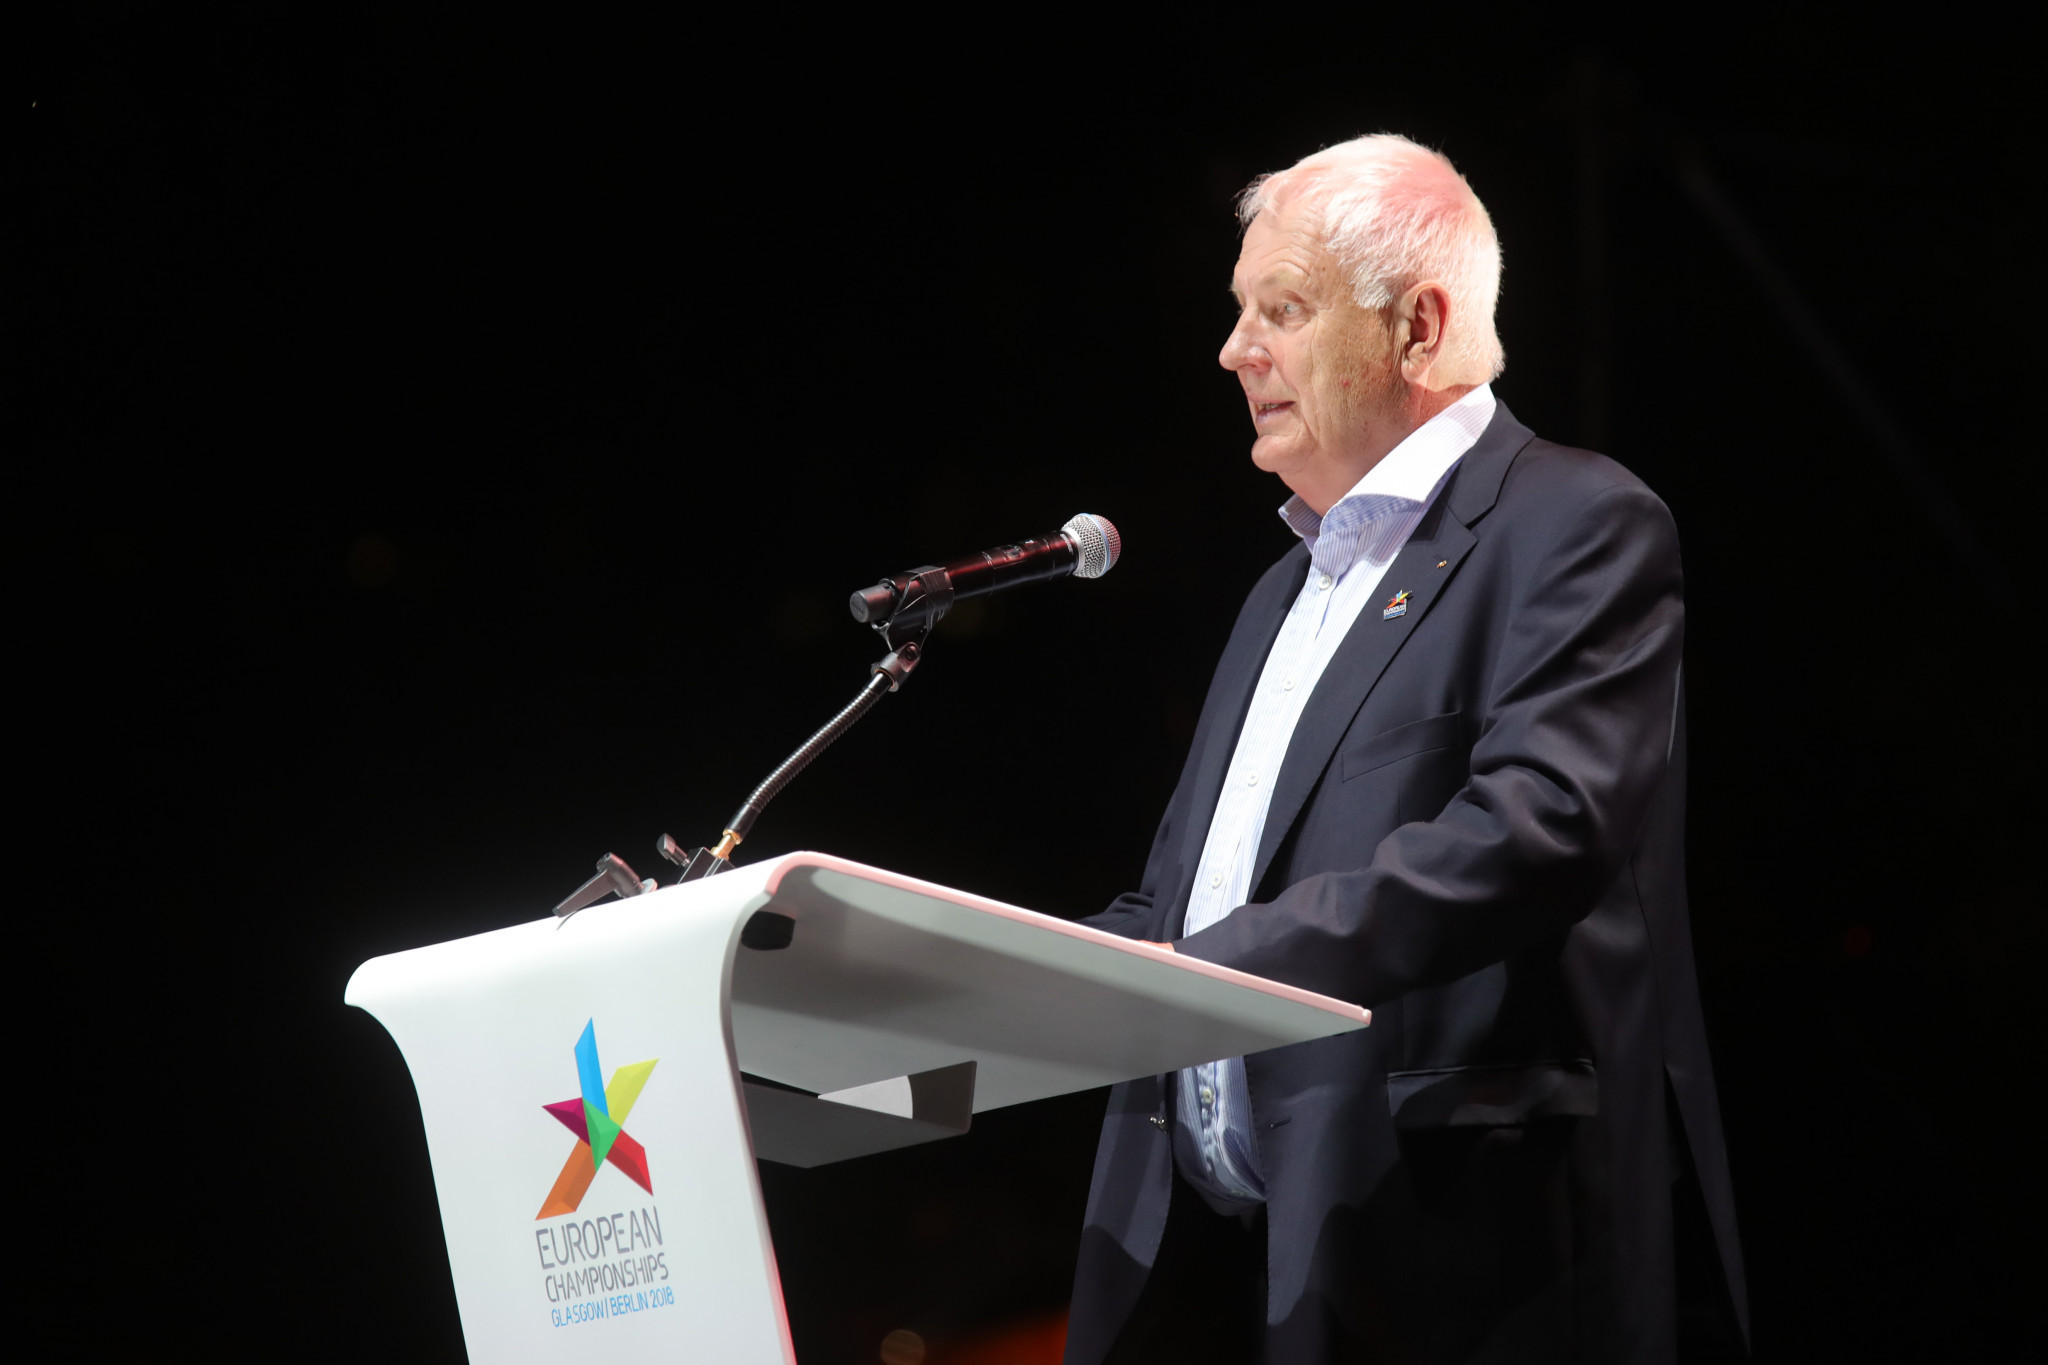 Svein Arne Hansen will stand unopposed for a second term as President when the European Athletics Congress meets in April ©Getty Images